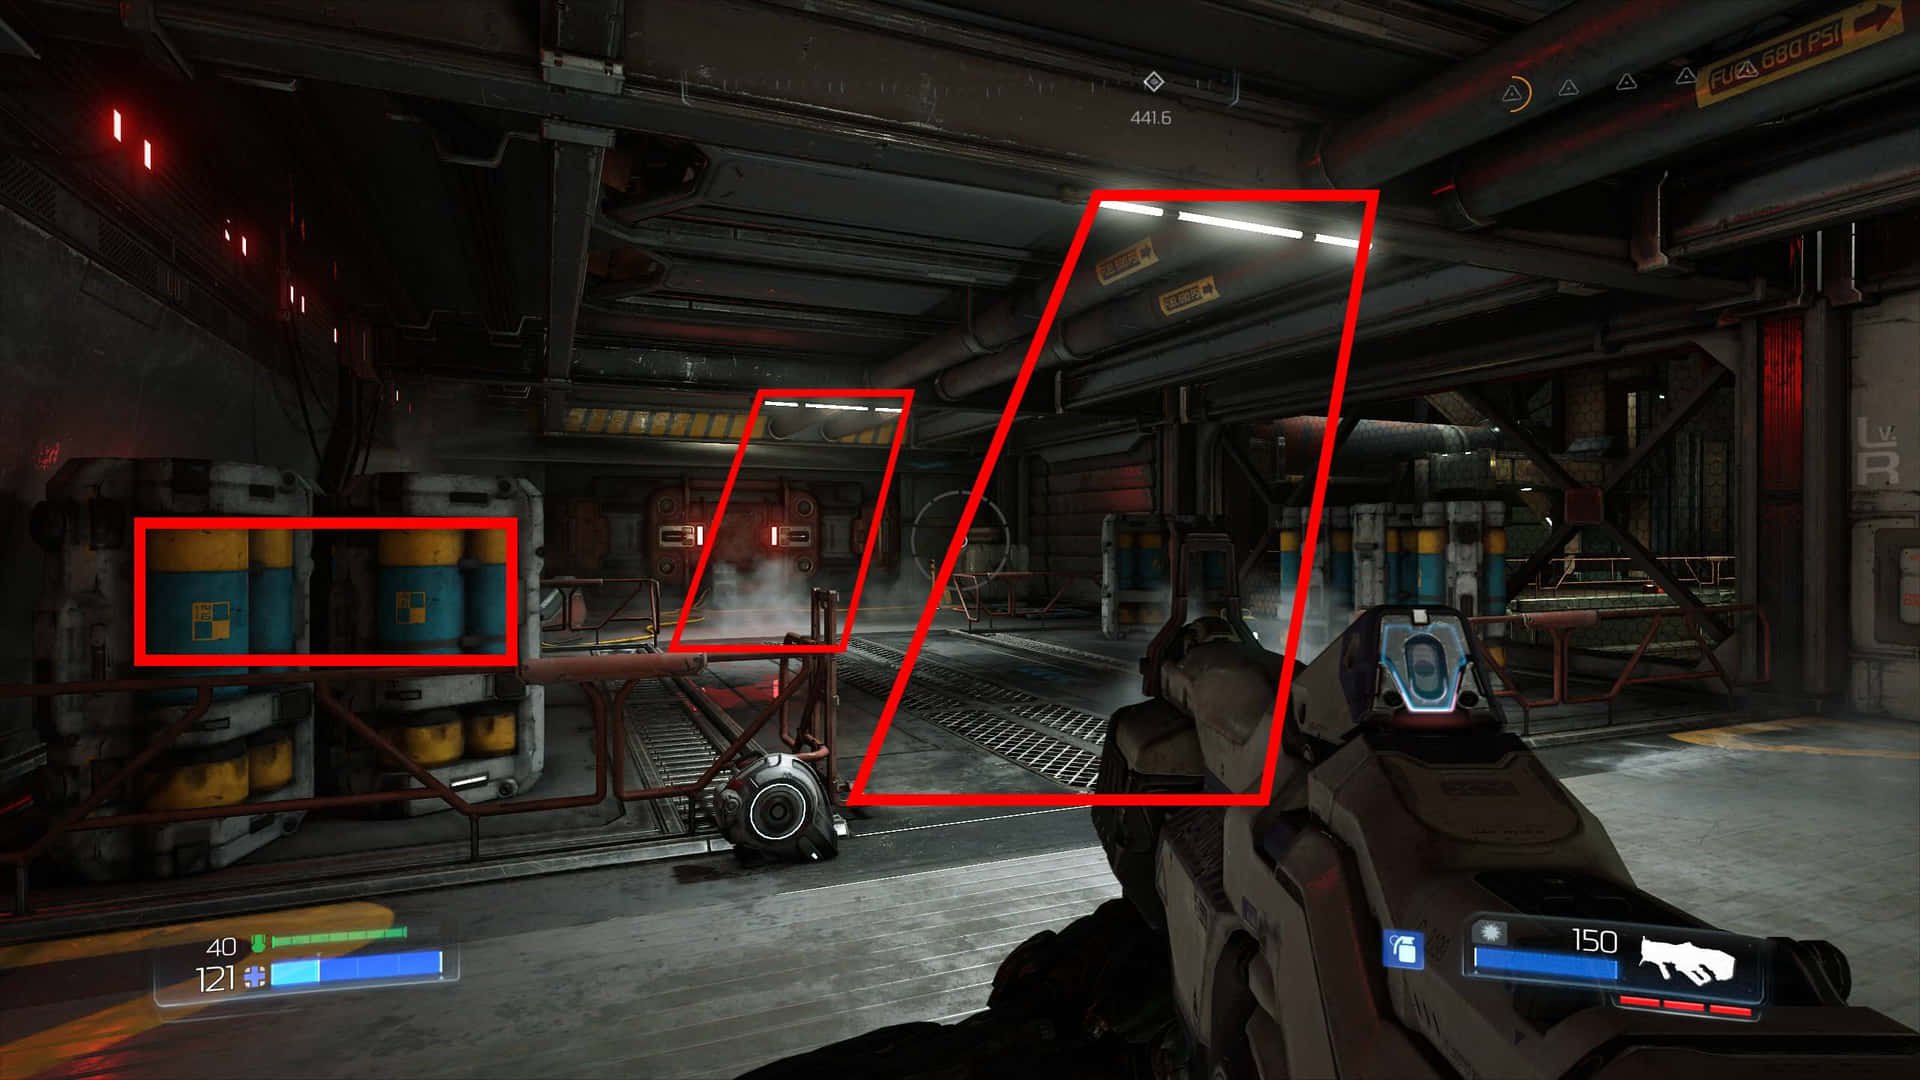 A Screenshot Of A Game With A Red Arrow Pointing To A Room